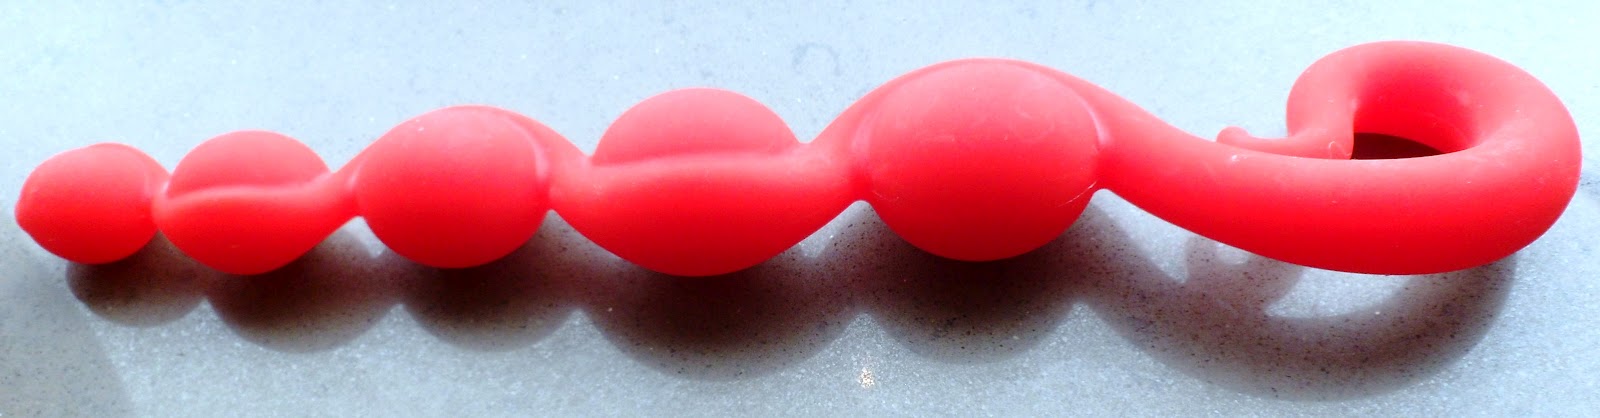 Fun Factory Bendy Beads Sex Toy Reviews And Advice From